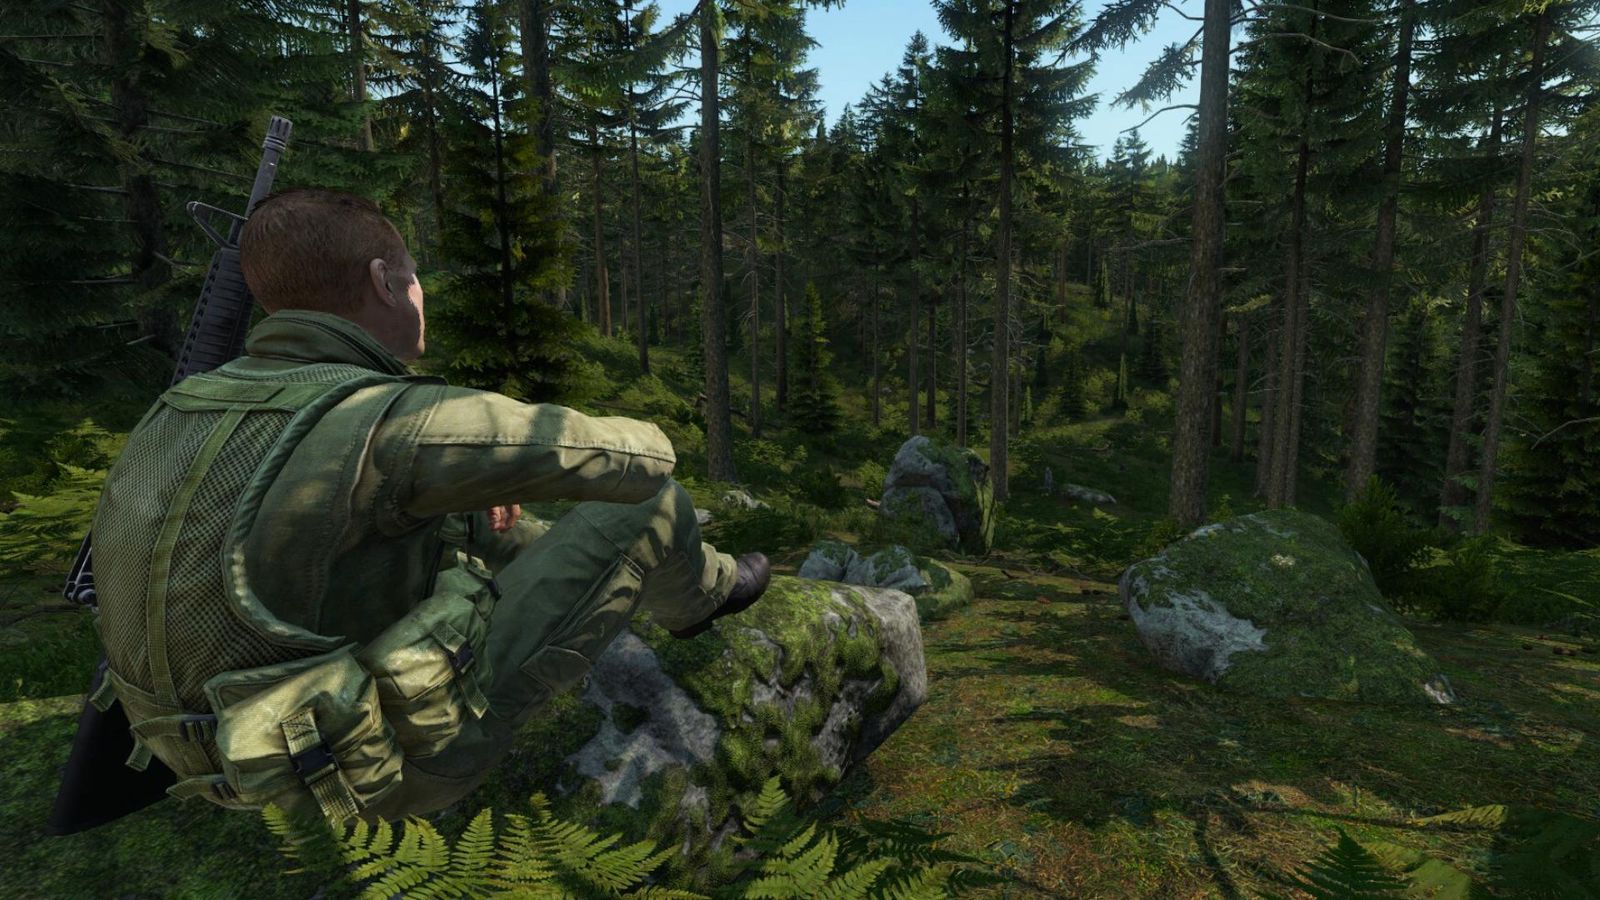 DayZ player in a forest